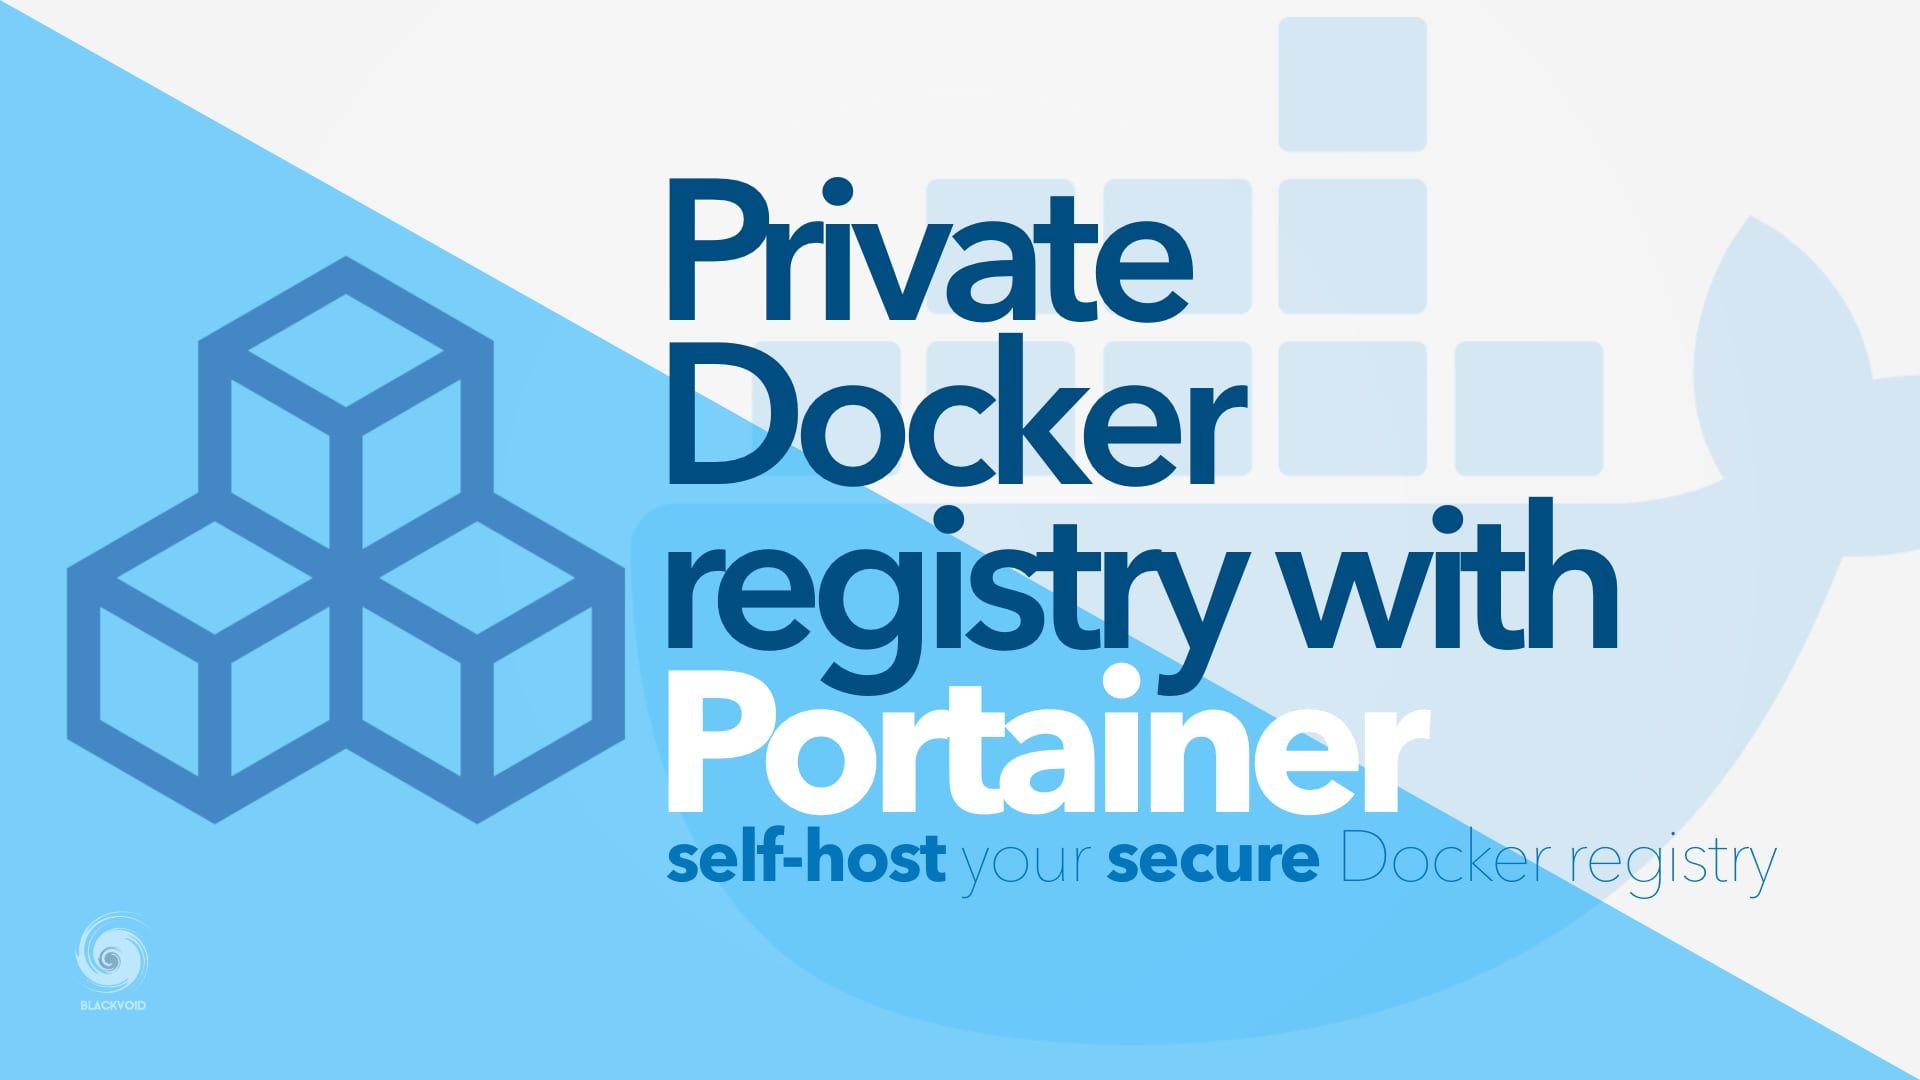 Private Docker registry with Portainer